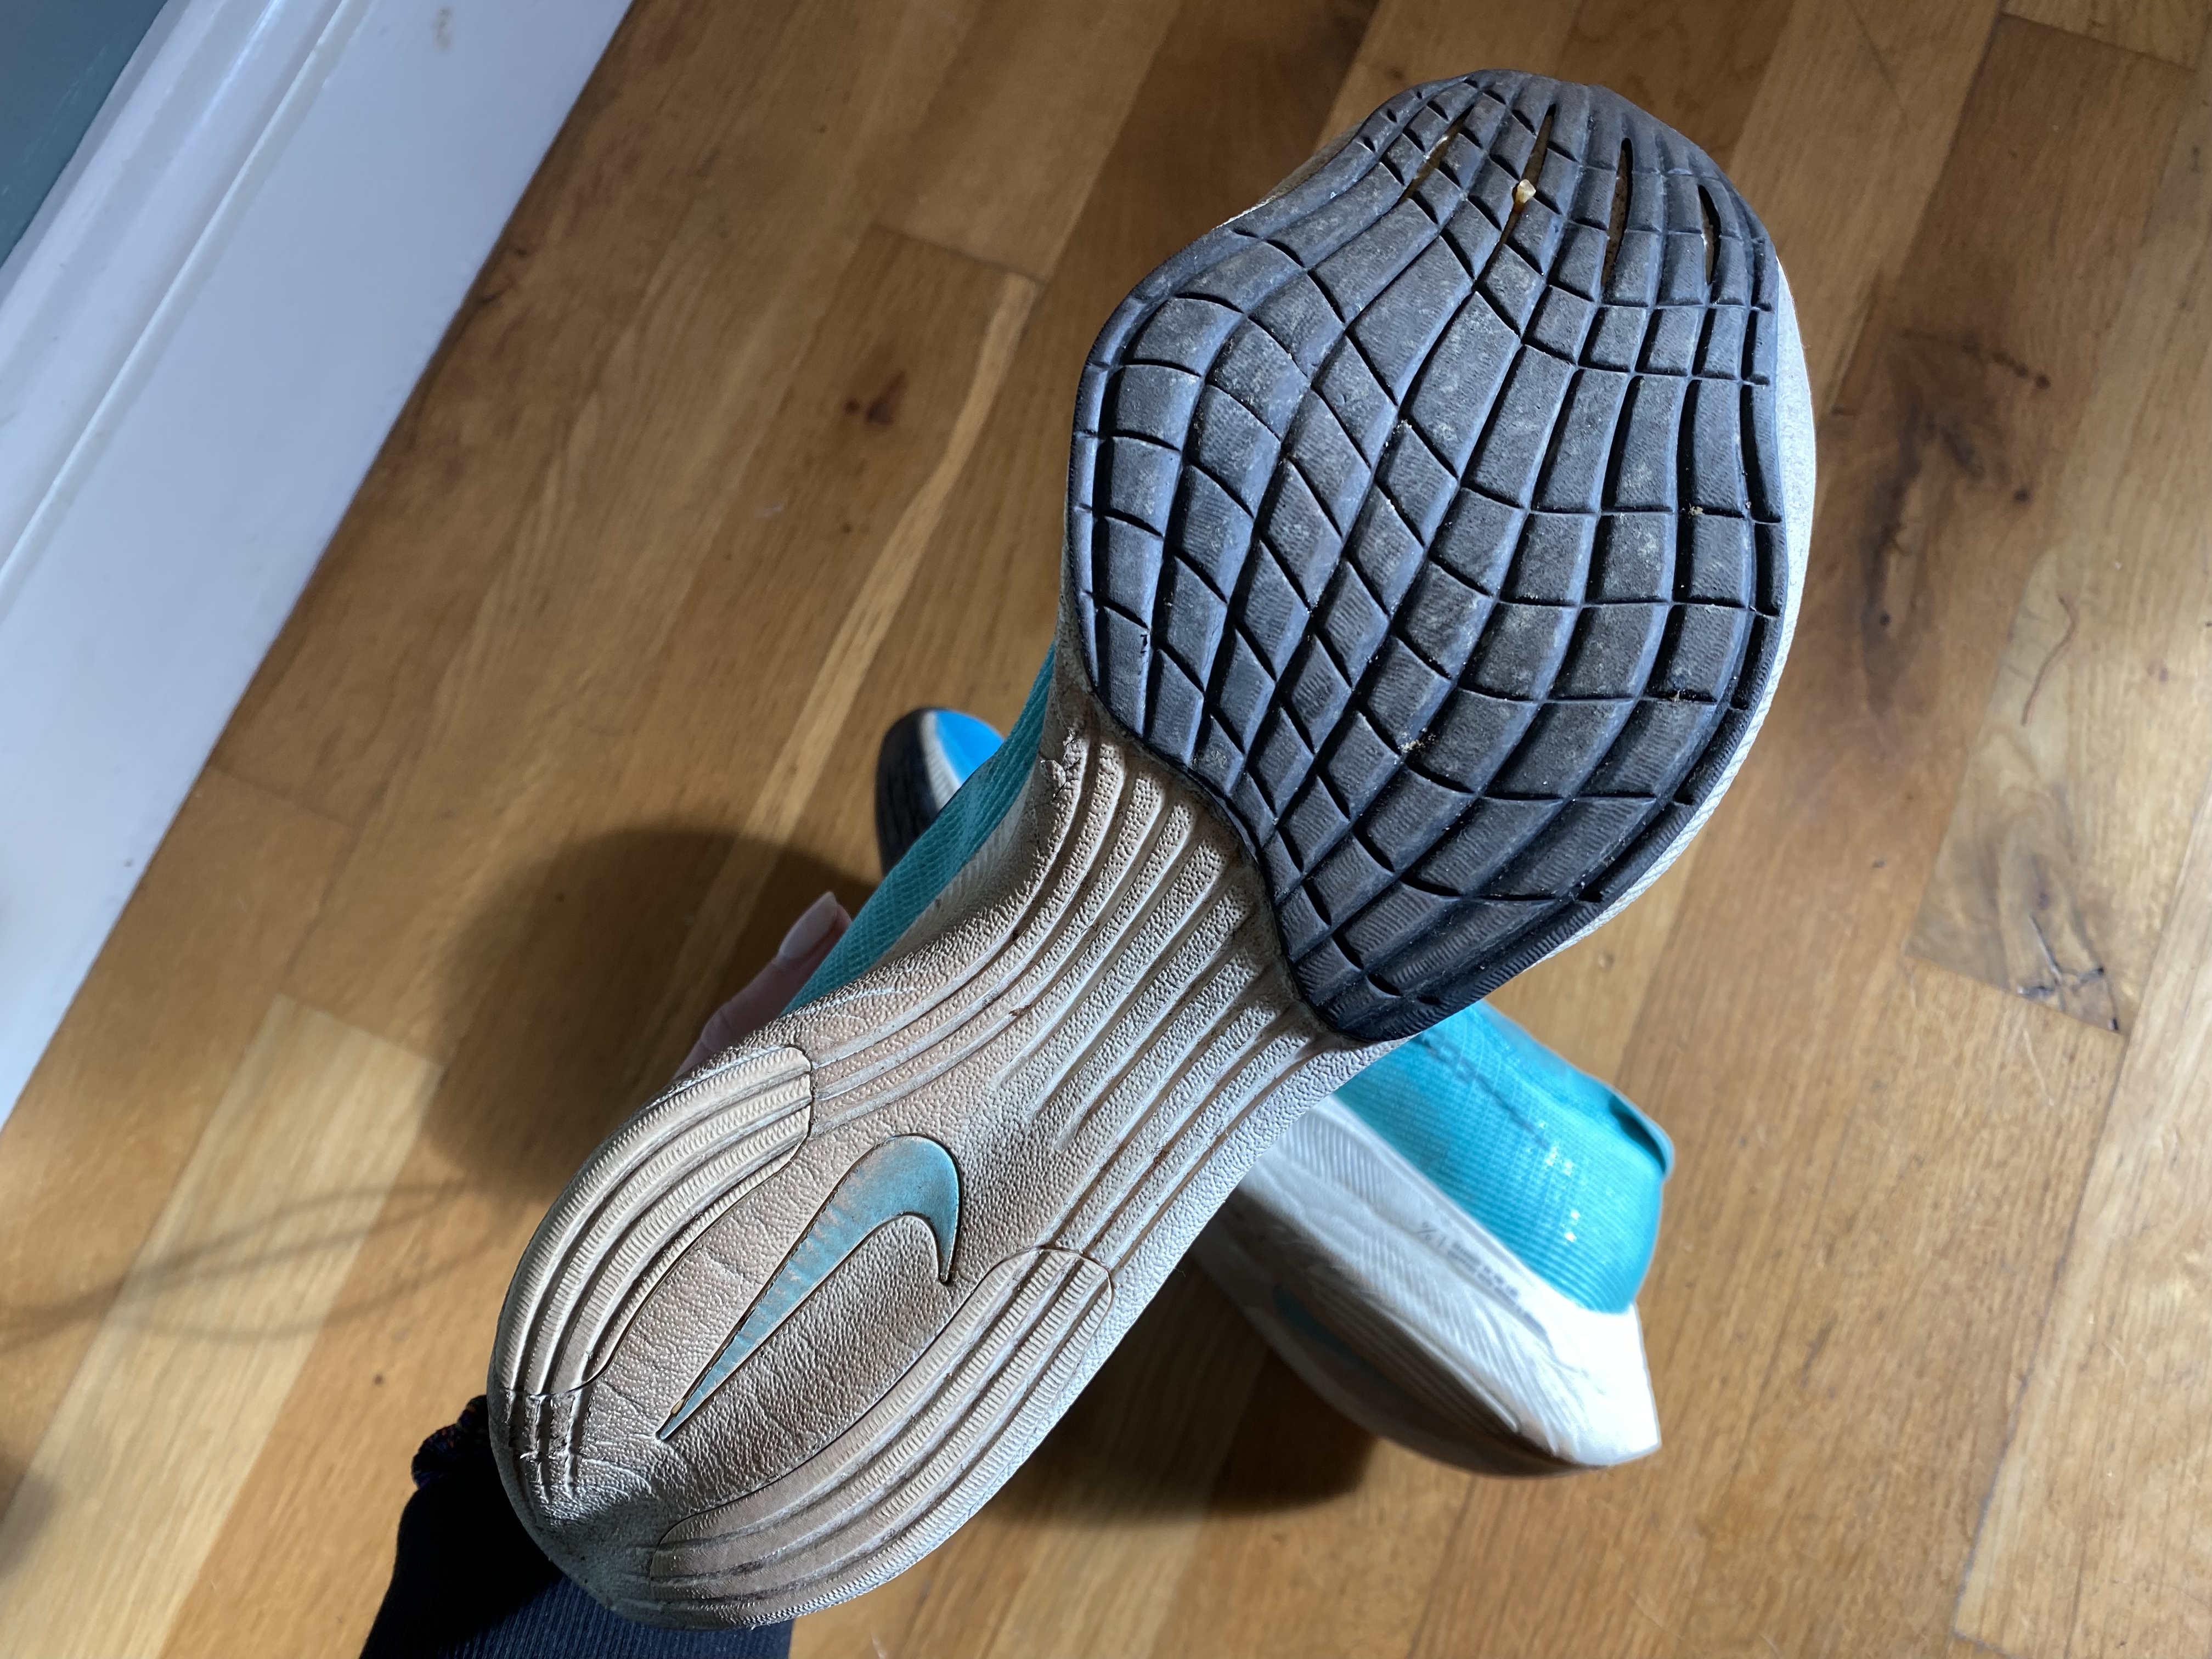 A photo of the outsole of the Nike Vaporfly Next% 2